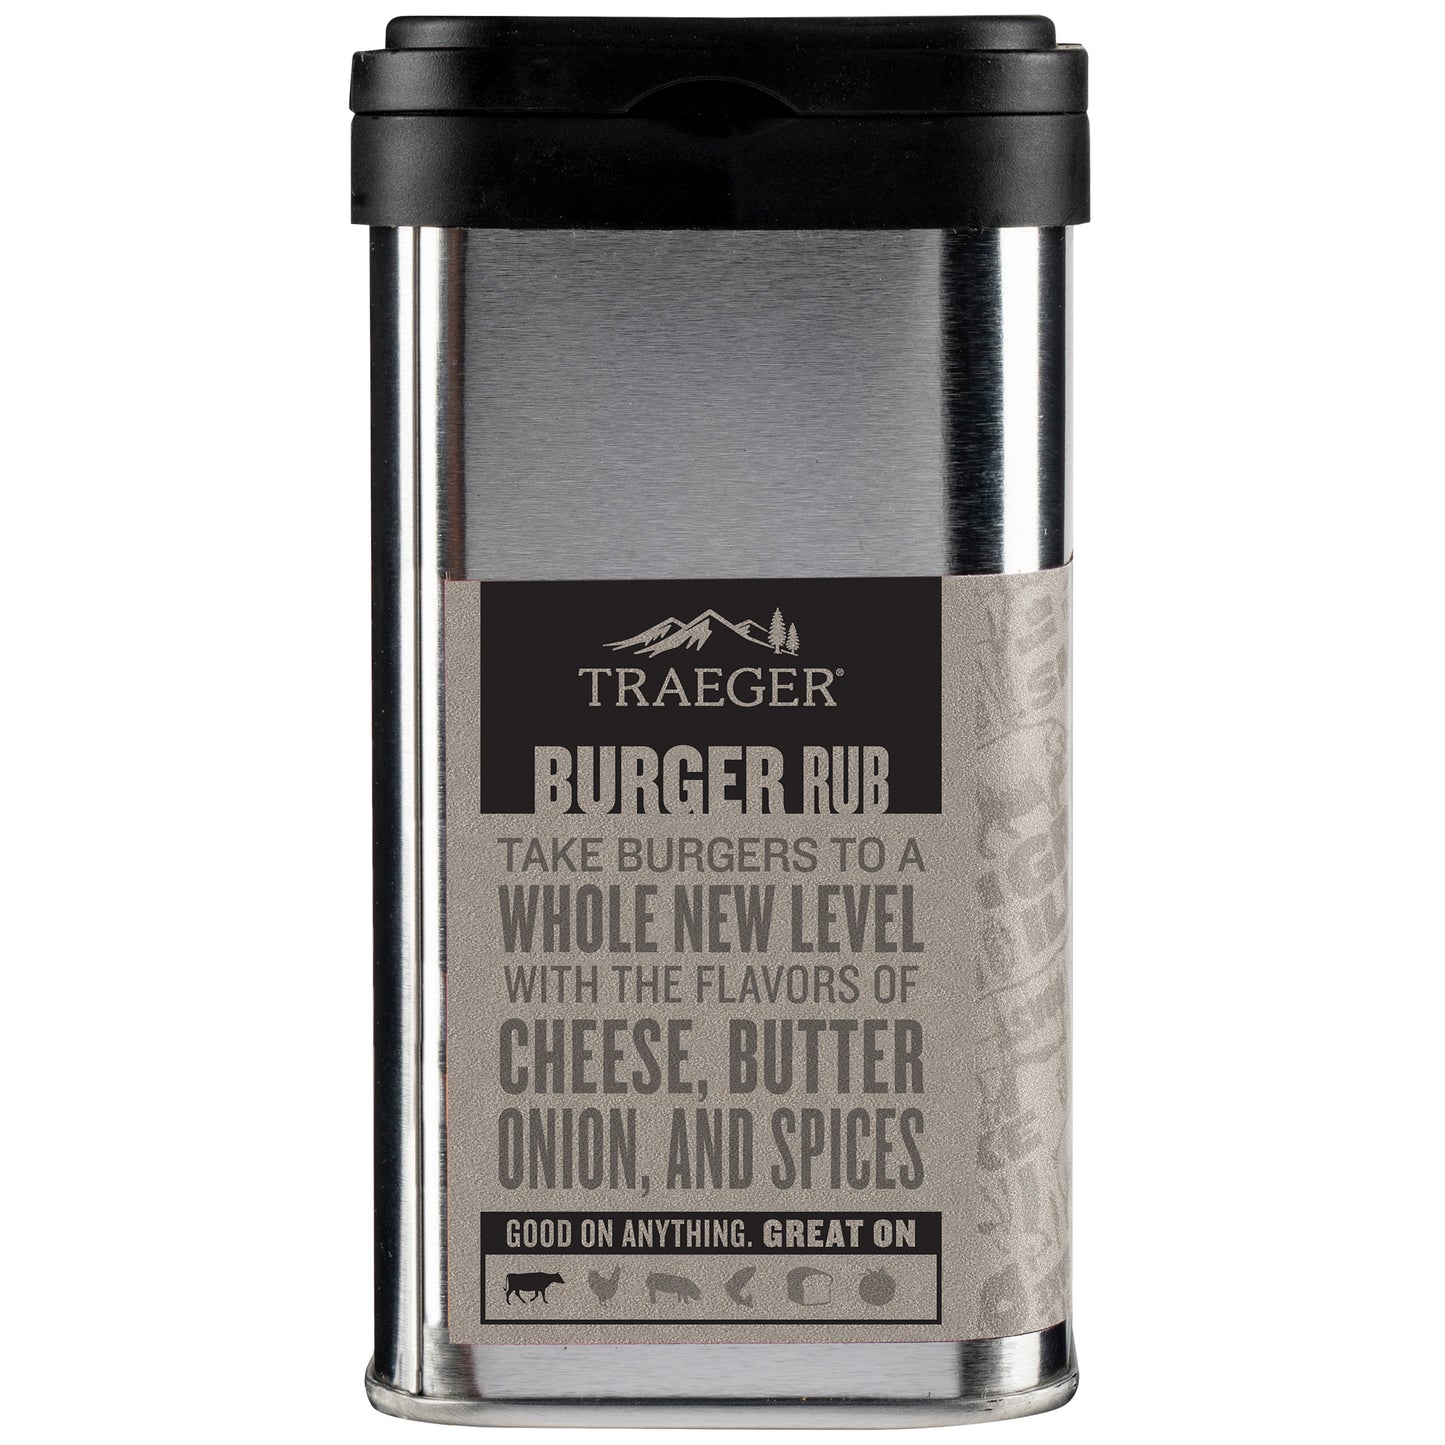 Traeger Burger Rub is great on beef, especially ground beef such as burgers and meatloaf.